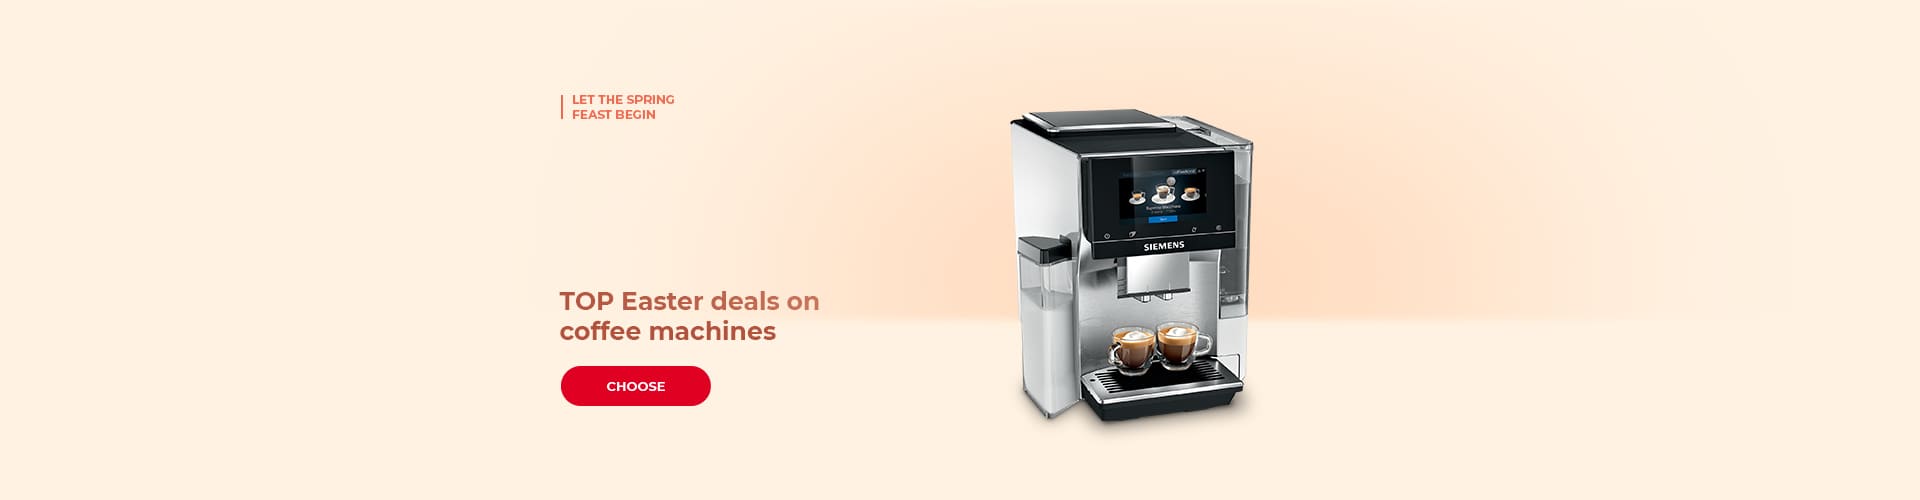 TOP Easter deals on coffee machines